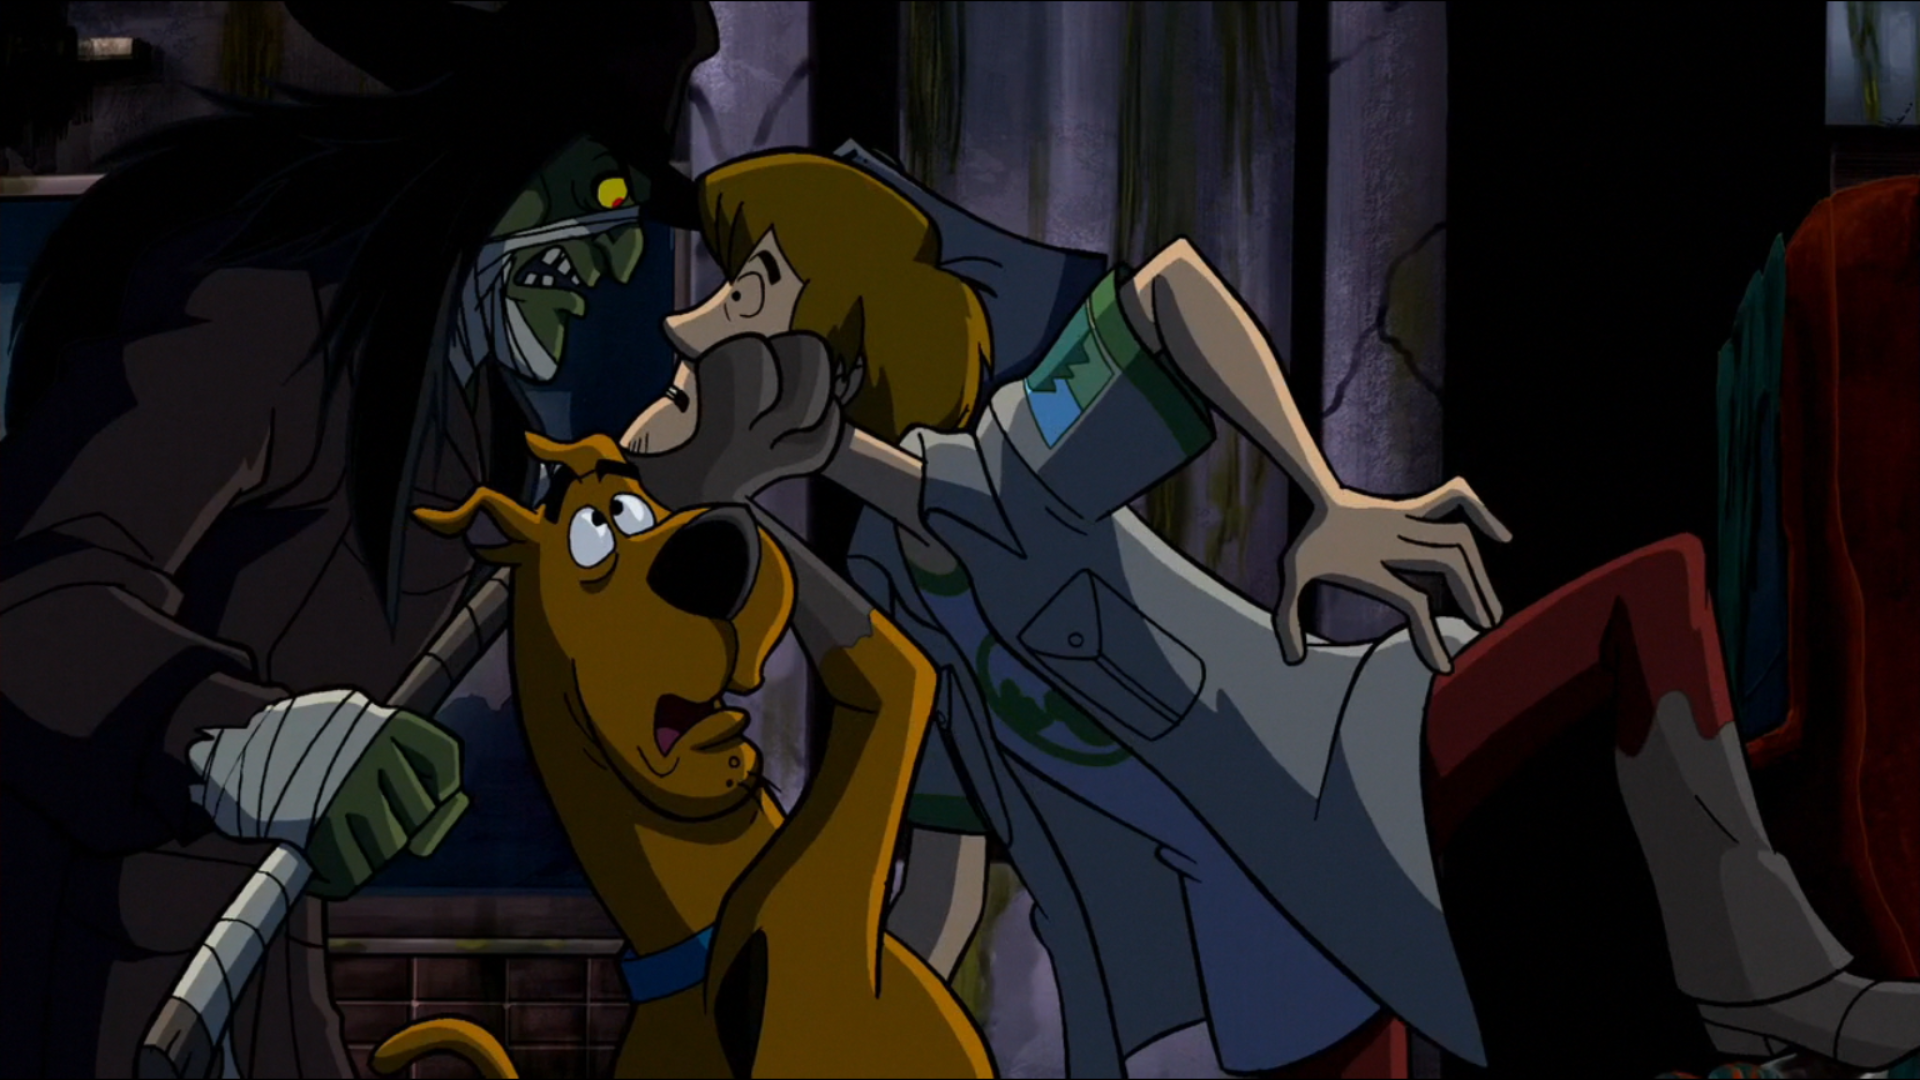 scooby doo camp scare